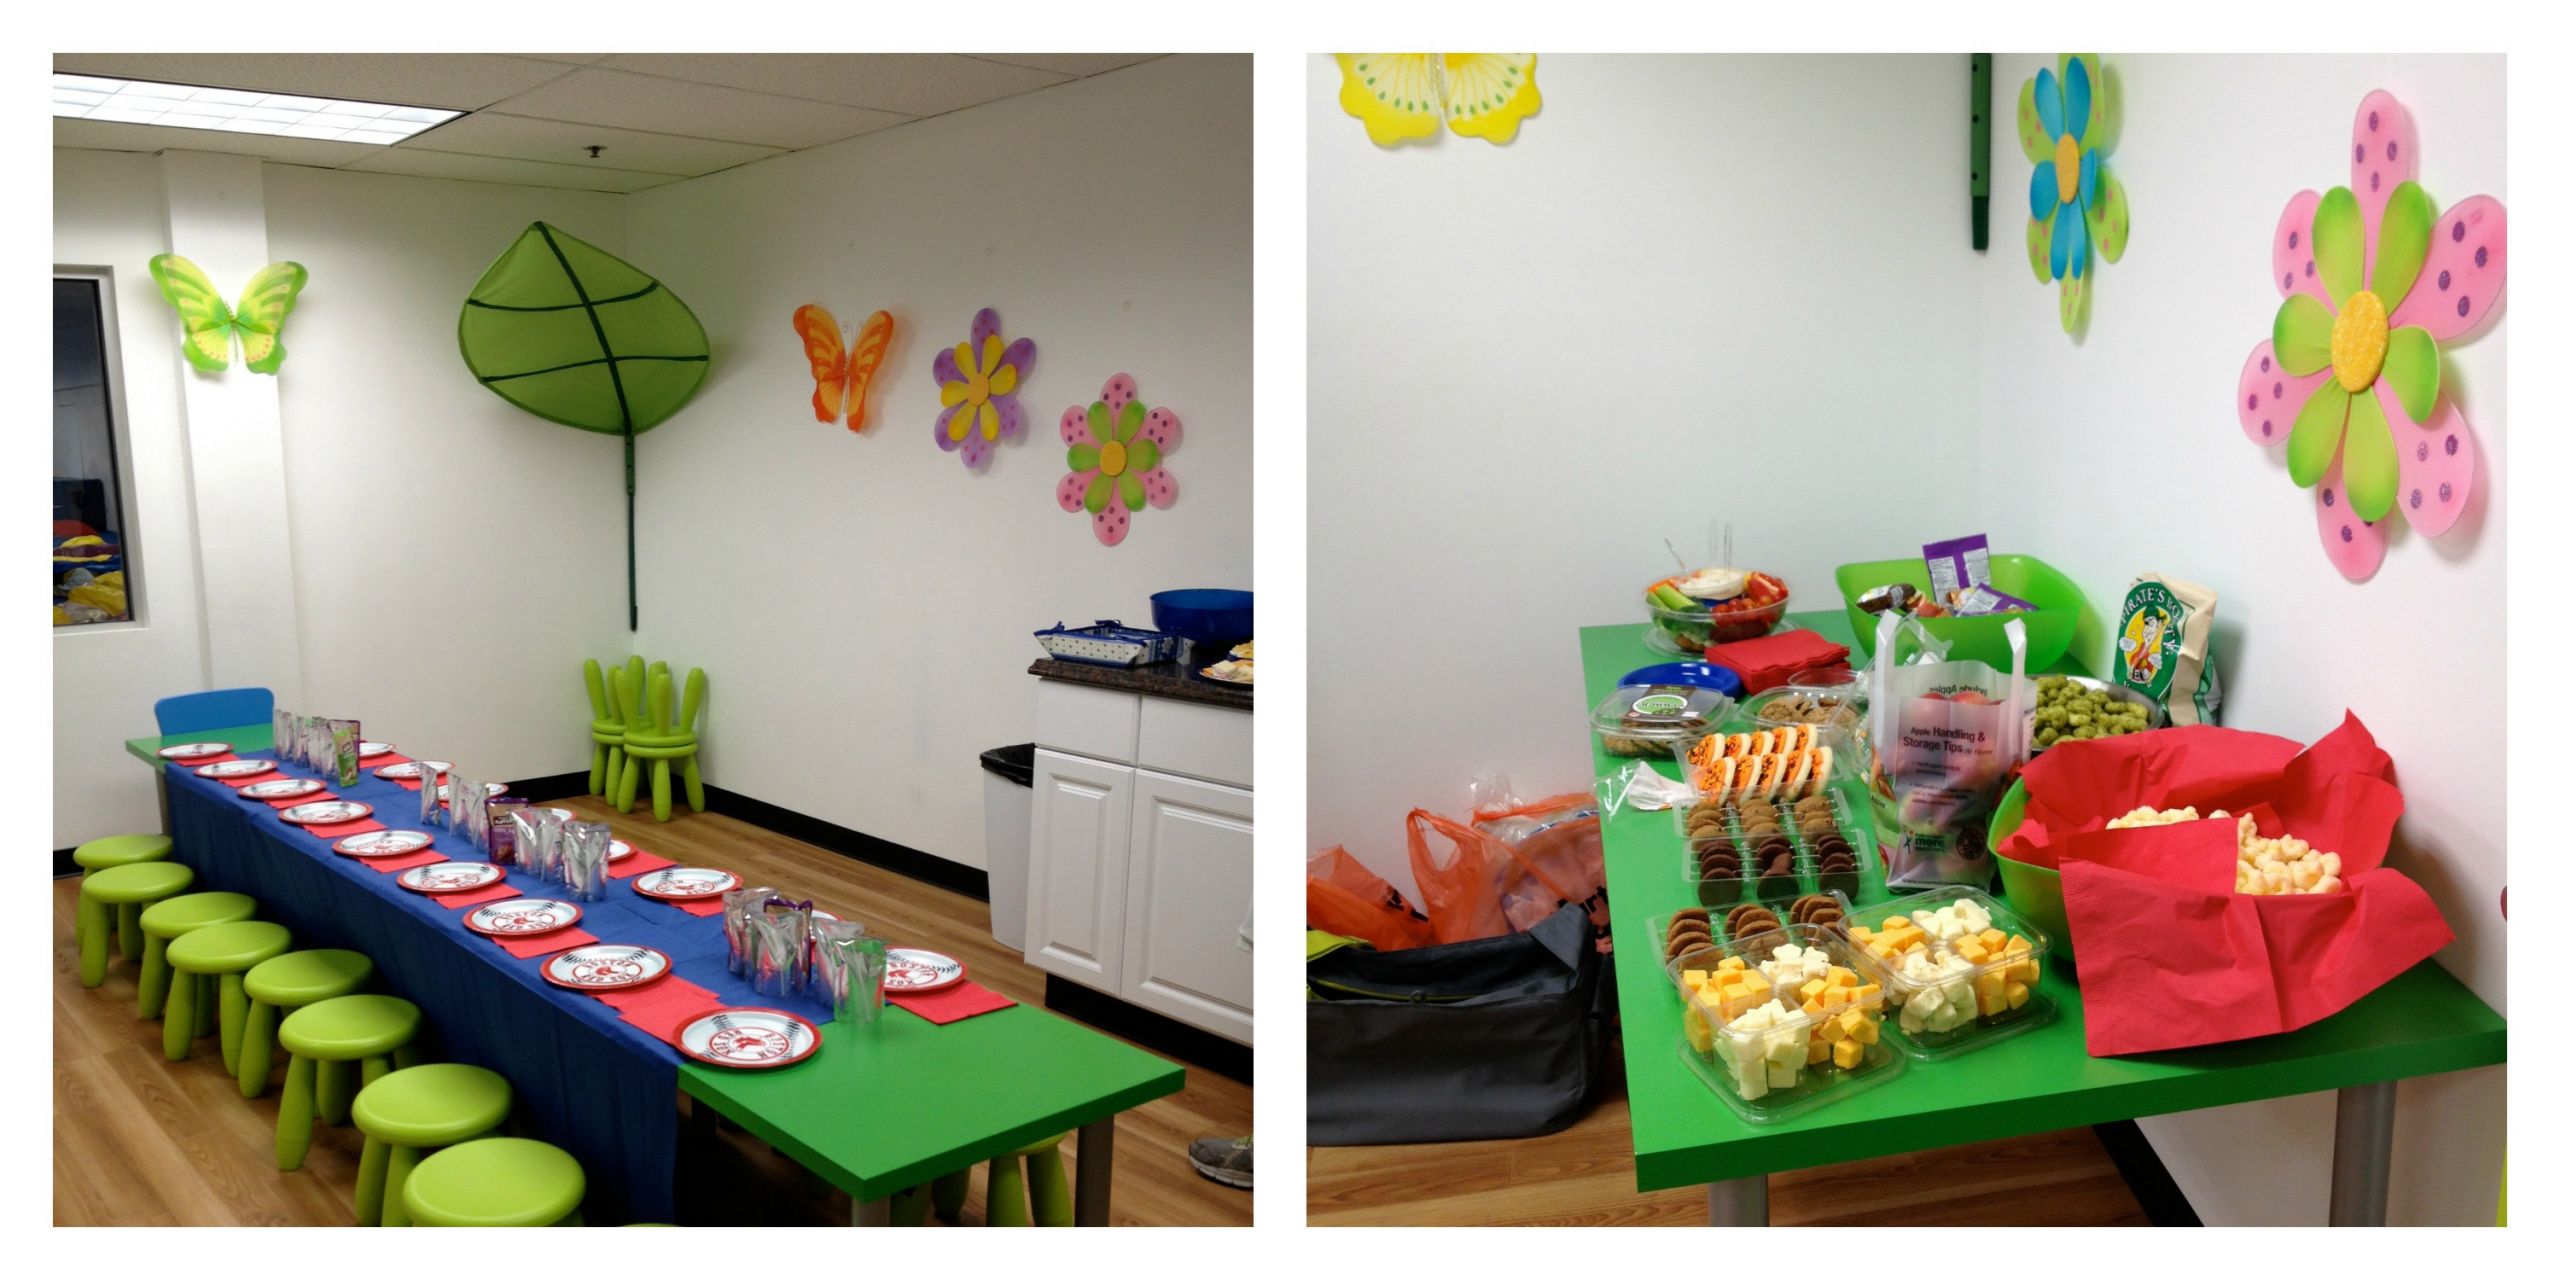 Children Bday Party Places
 Kids Birthday Party Places in MA Energy Fitness